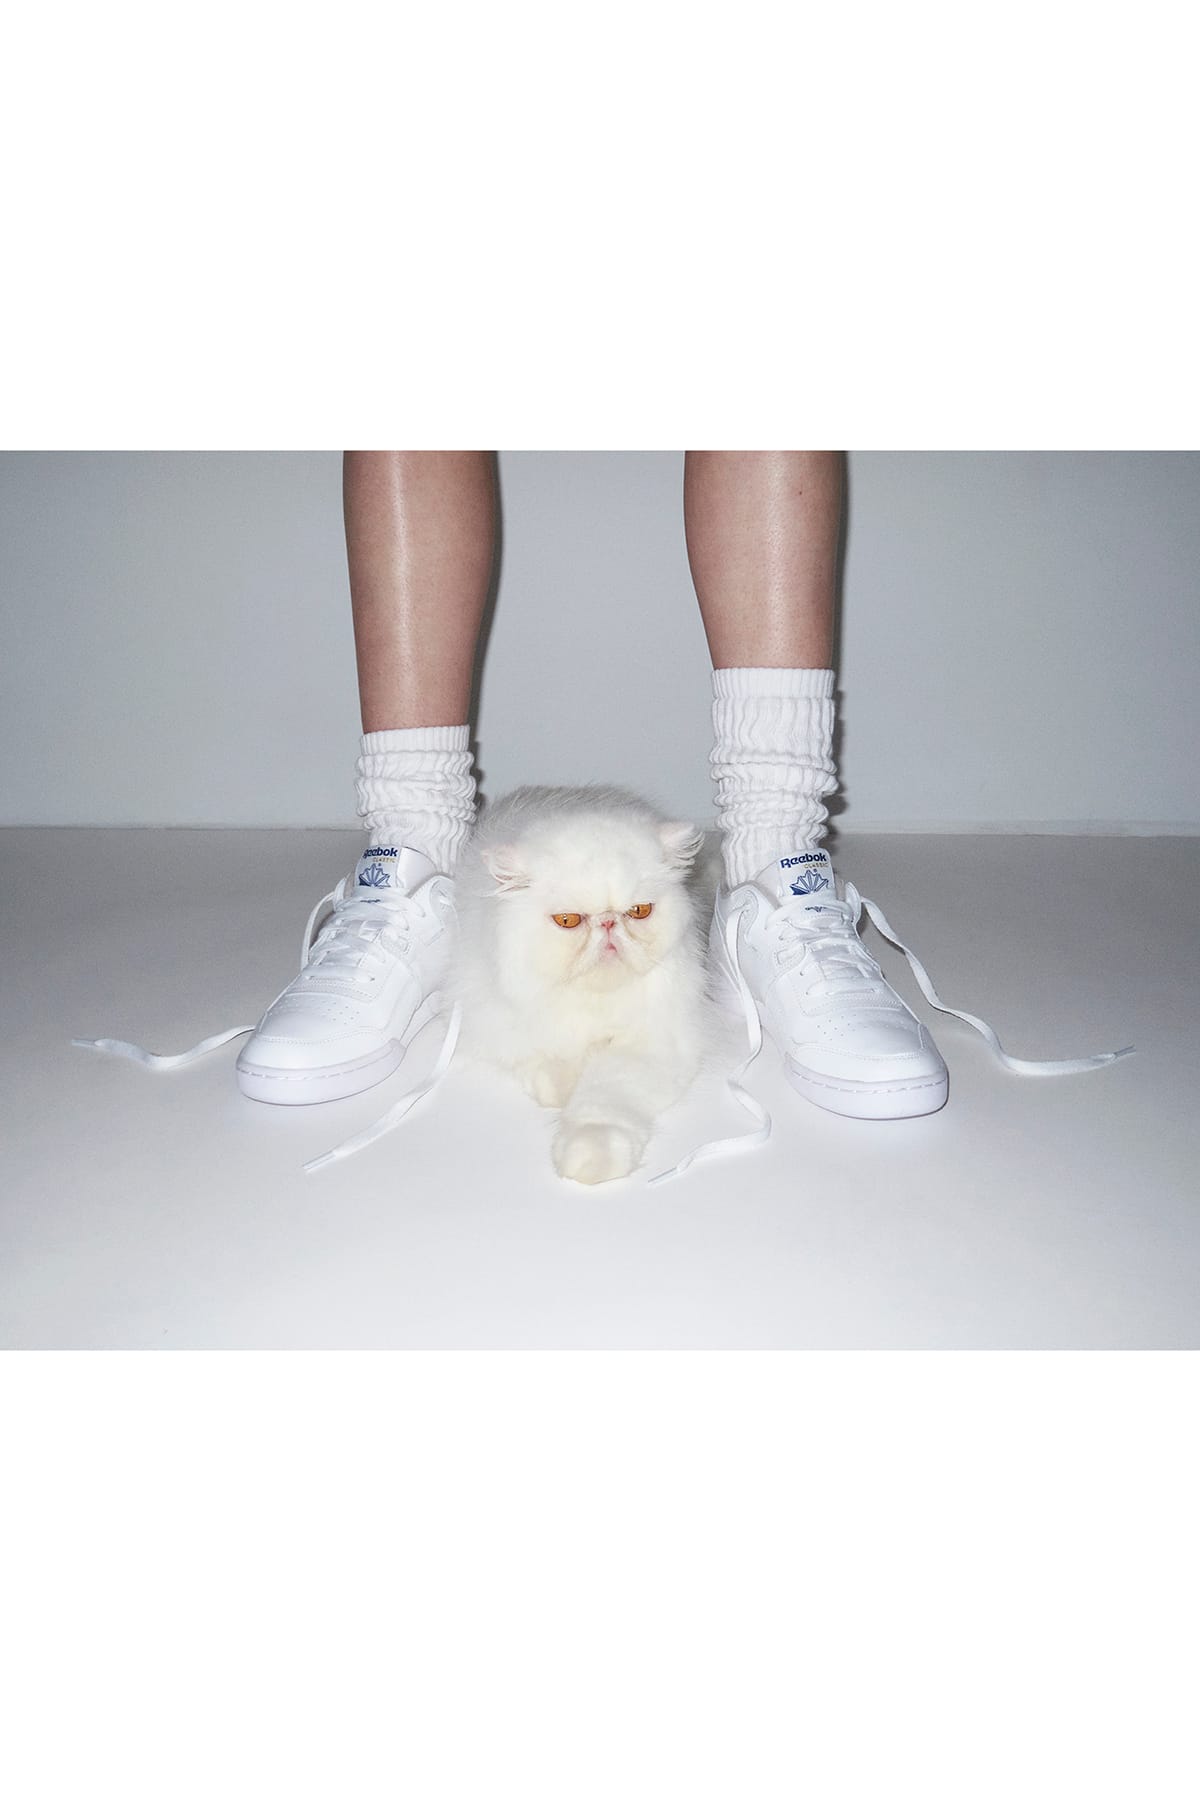 how to clean white reebok sneakers